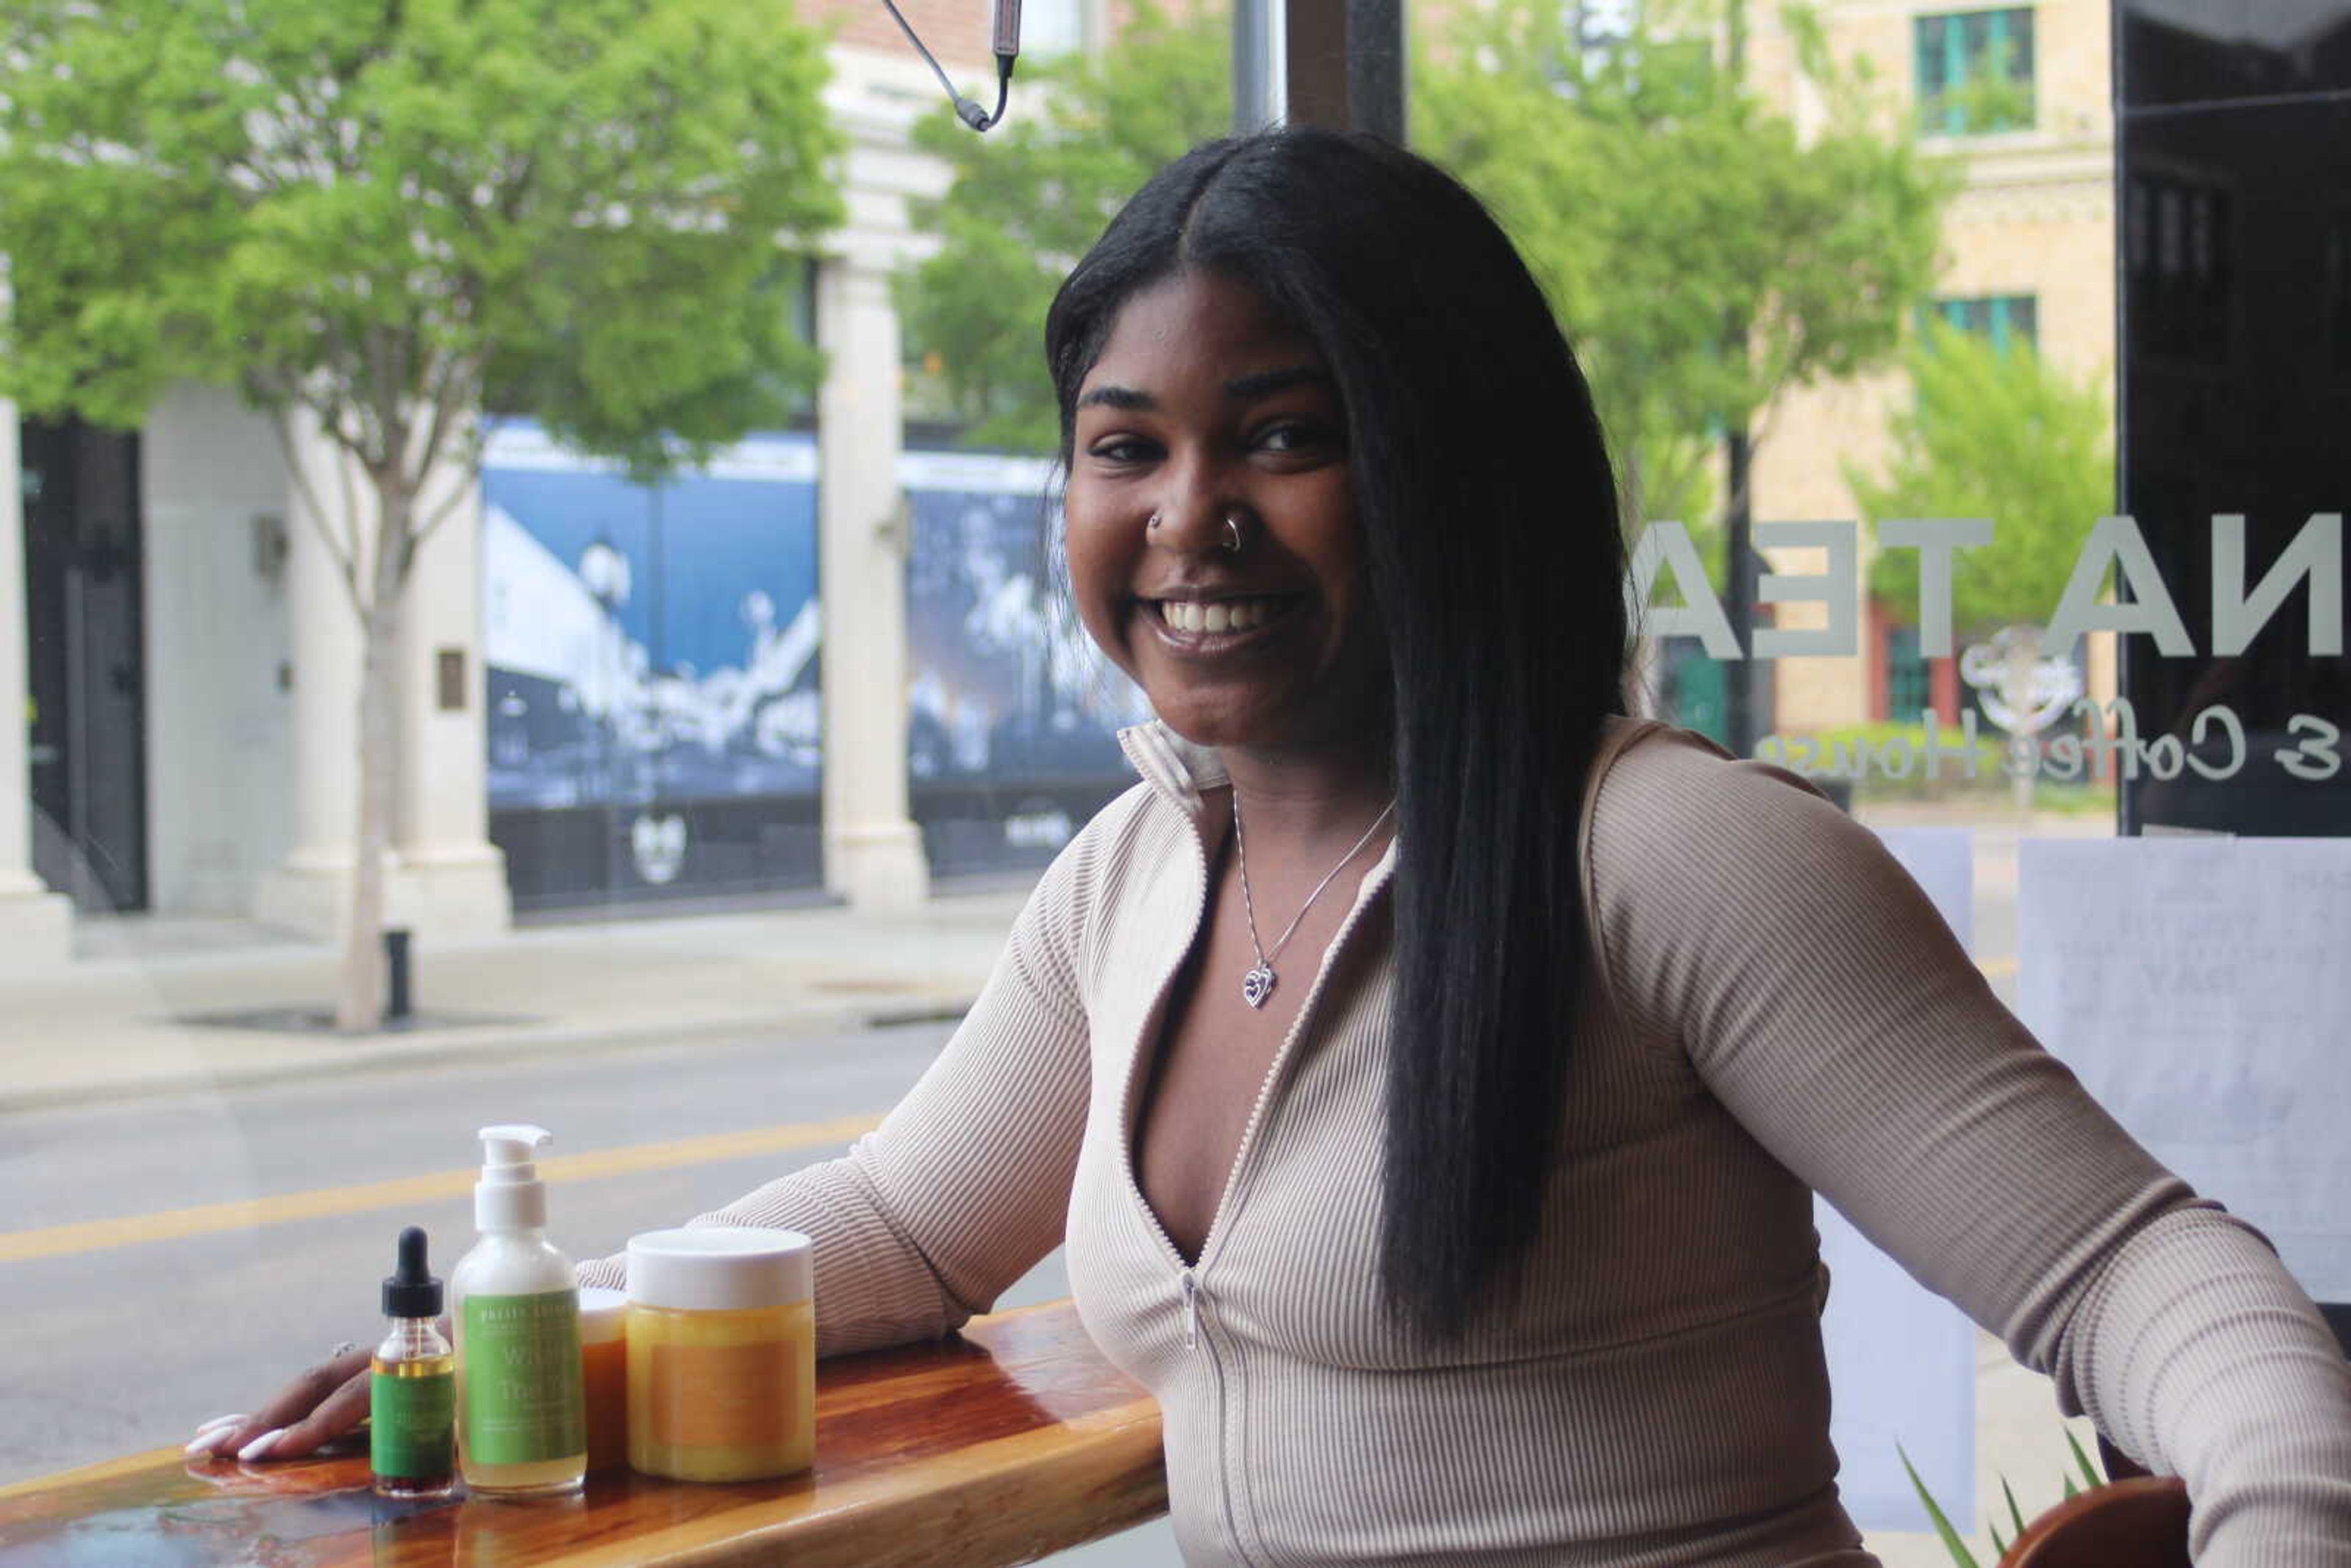 Senior business administration major Brooklyn Armstead created her skincare line Purity Skincare in May of 2021. Her skincare line was featured at the Black Business Expo on April 26.